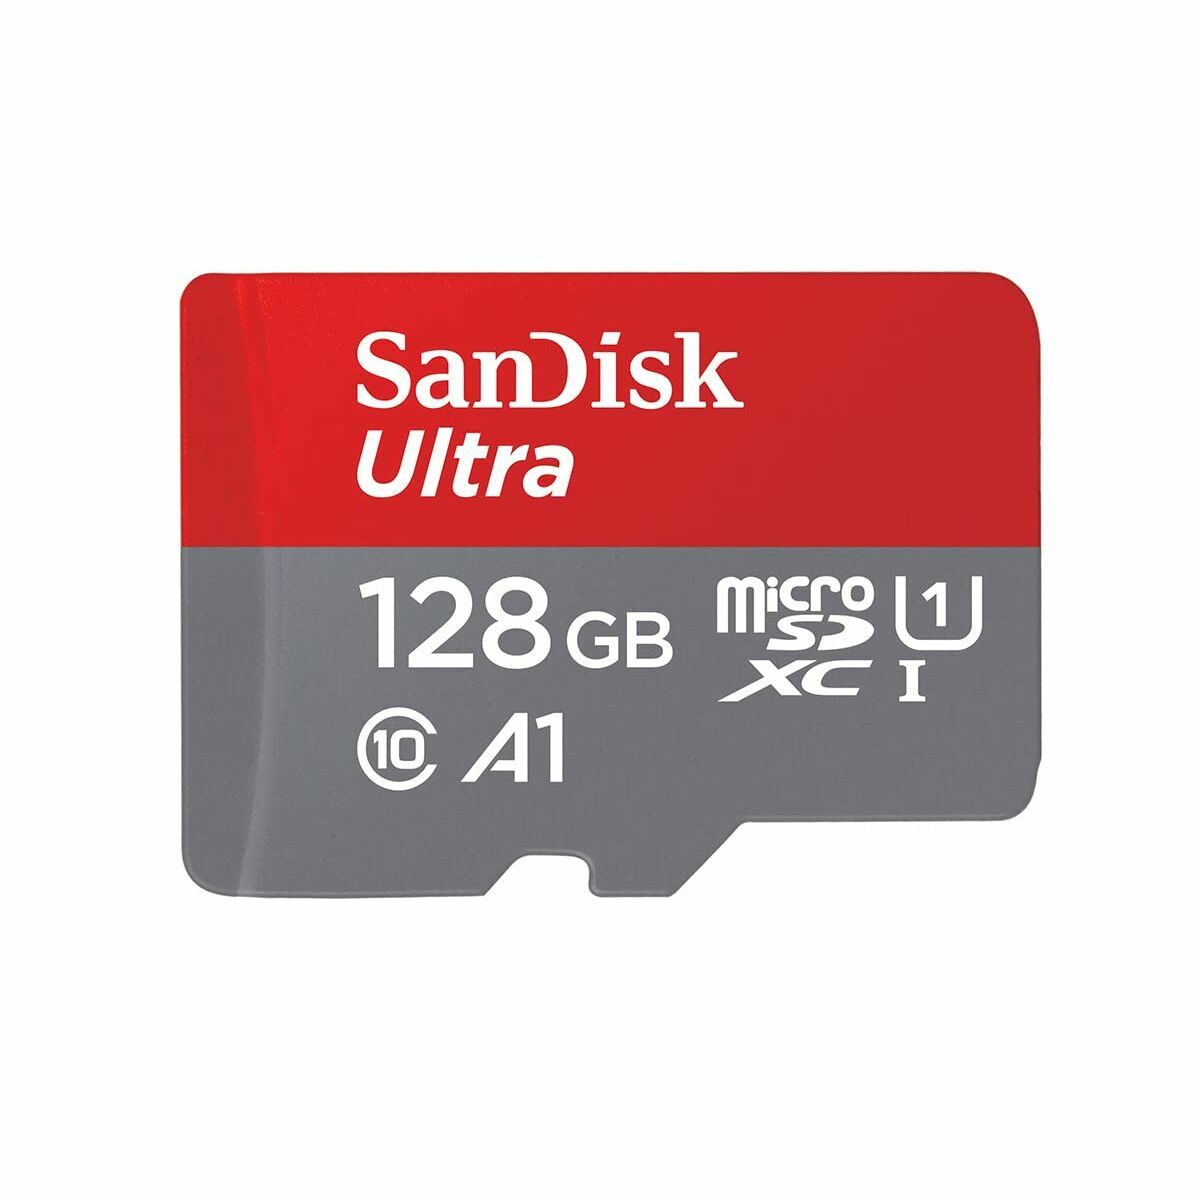 Micro SD Memory Card with Adaptor SanDisk Ultra, SanDisk, Computing, Data storage, micro-sd-memory-card-with-adaptor-sandisk-ultra, Brand_SanDisk, category-reference-2609, category-reference-2803, category-reference-2813, category-reference-t-19685, category-reference-t-19909, category-reference-t-21355, category-reference-t-25632, computers / components, Condition_NEW, Price_20 - 50, Teleworking, RiotNook